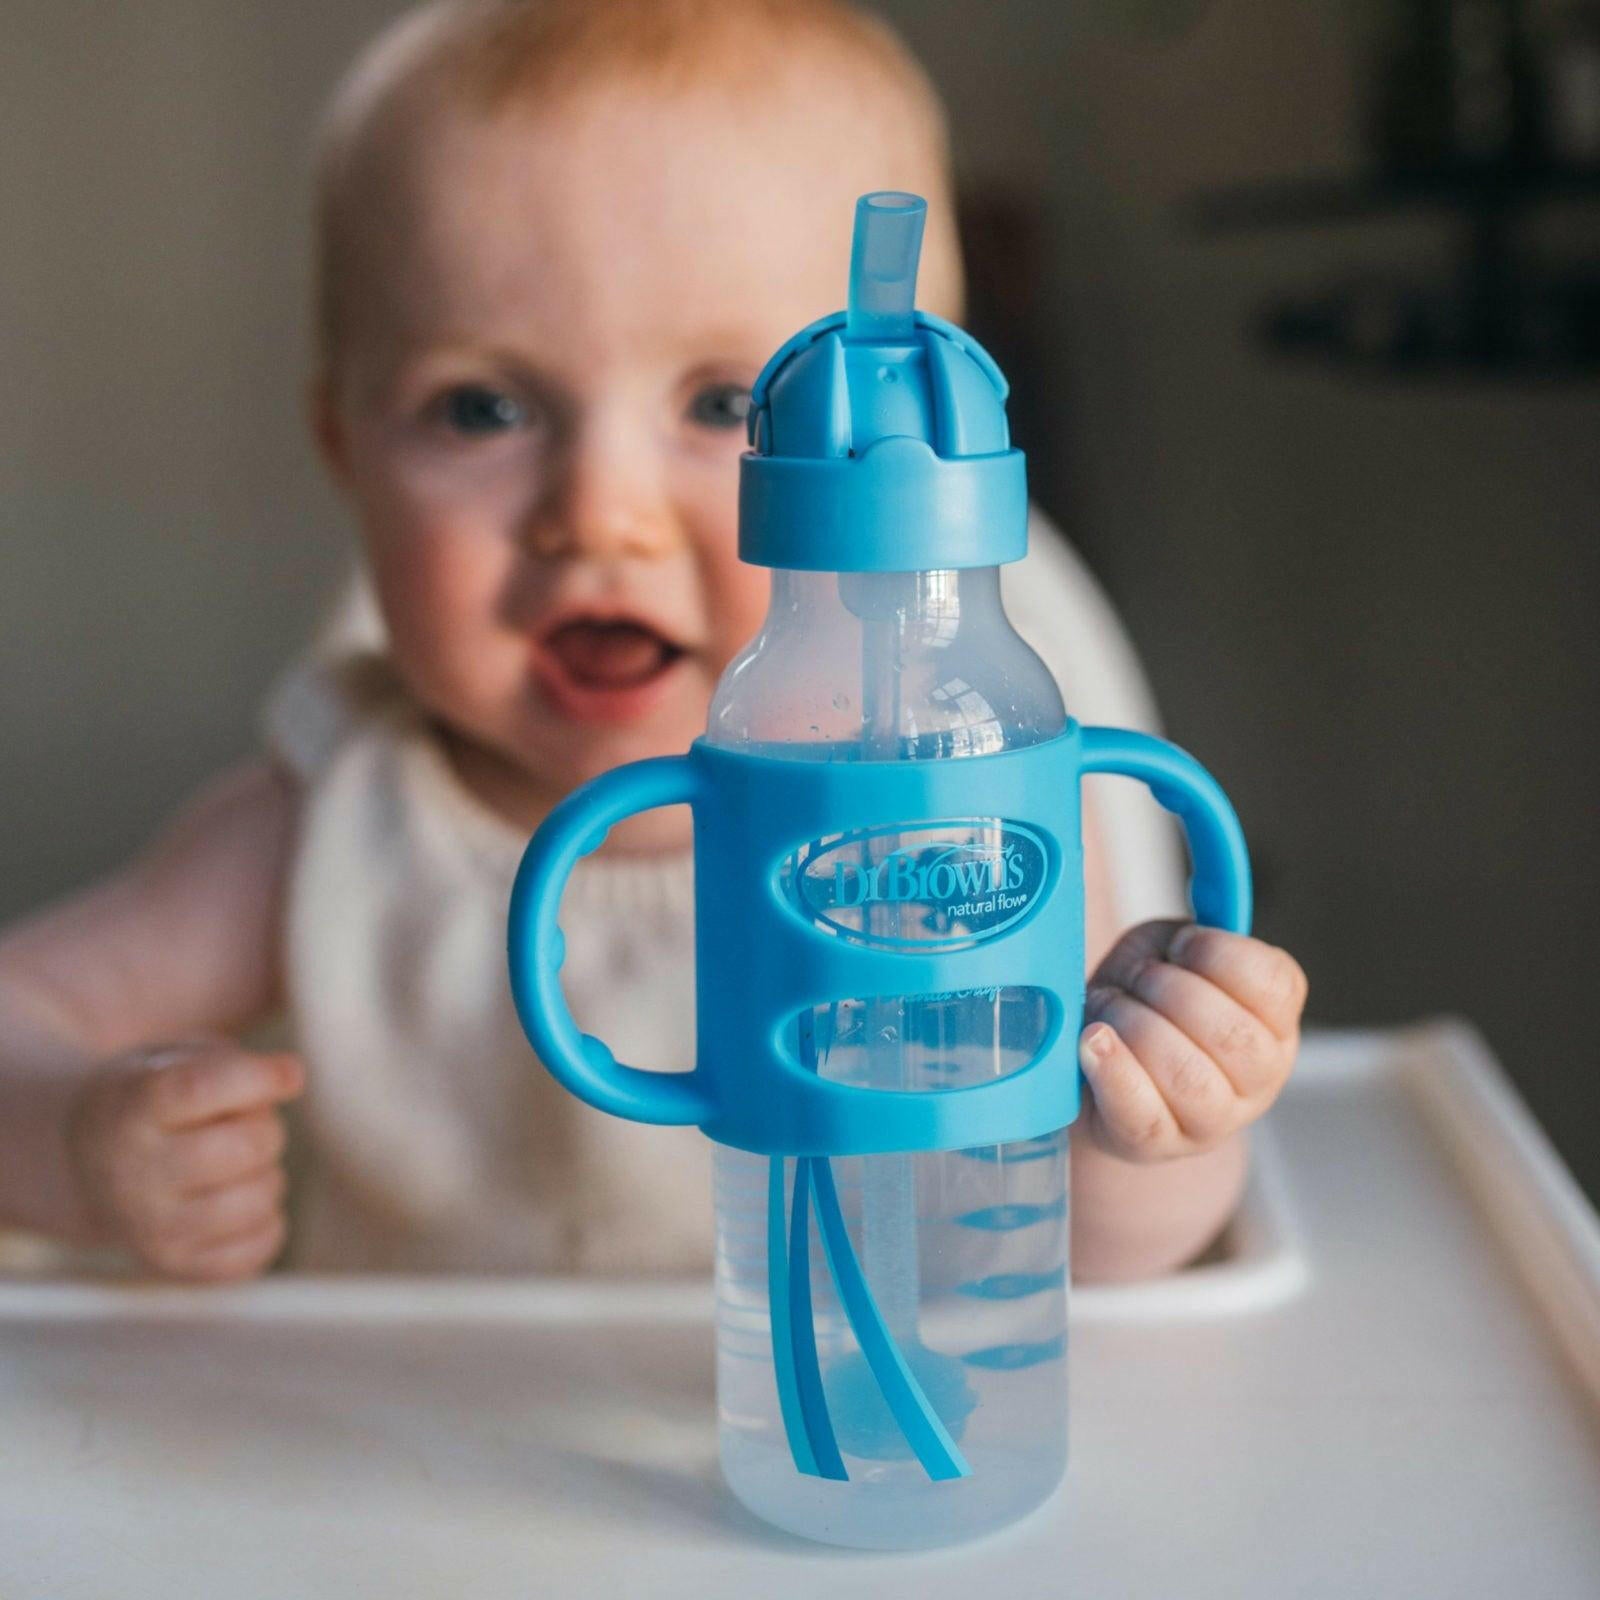 Dr. Brown’s Milestones Sippy Straw Bottle with Silicone Handles, 8 oz - Blue - Traveling Tikes 